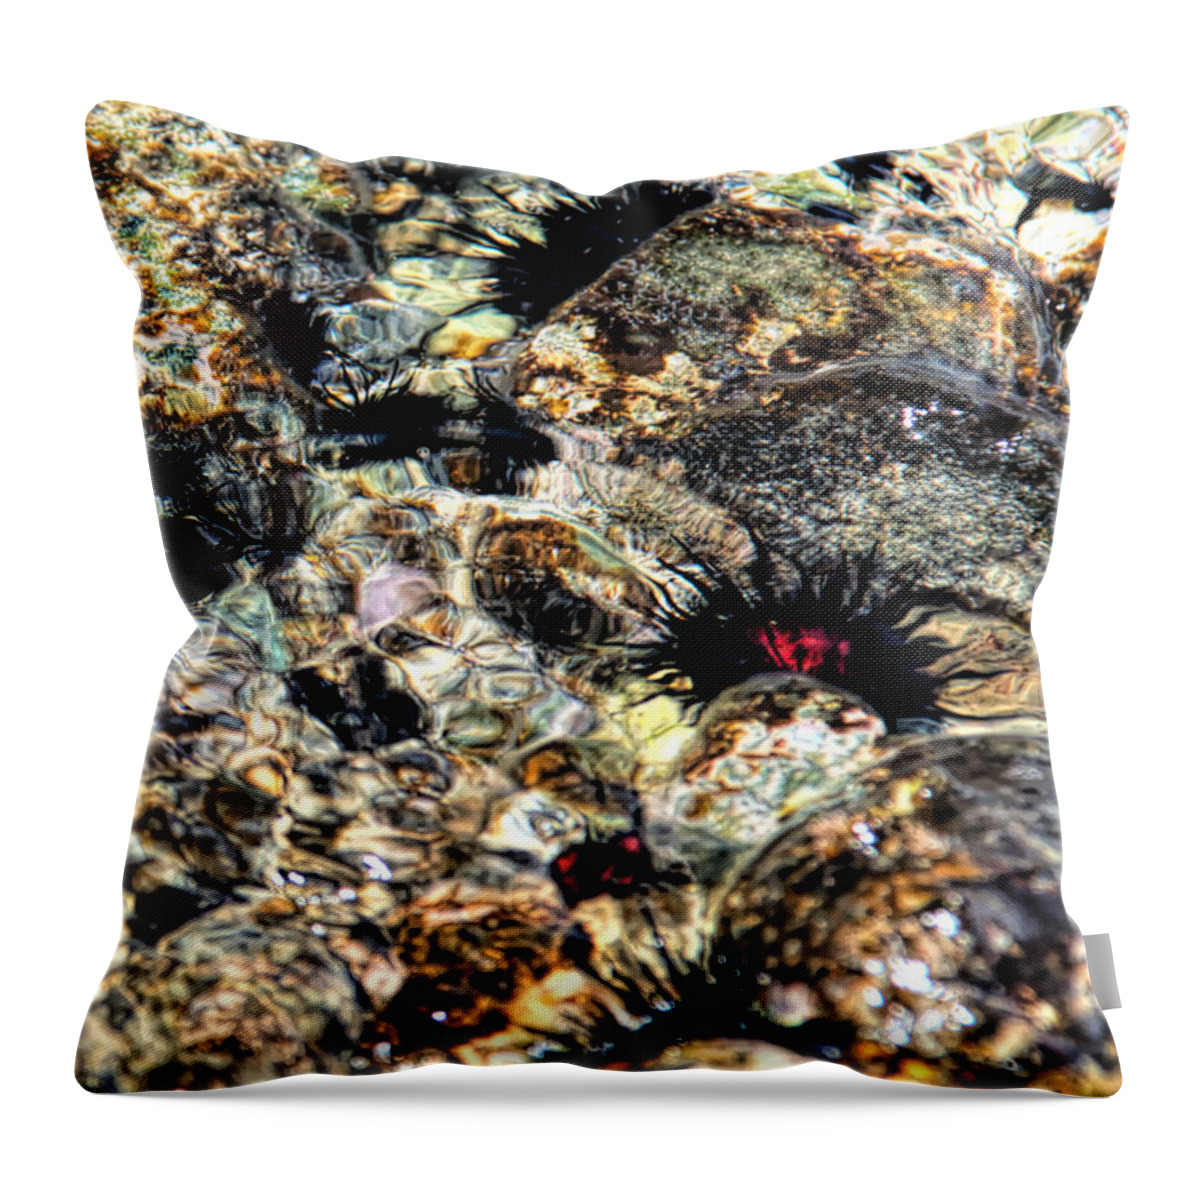 Sea Urchins Throw Pillow featuring the photograph Swirling Sea Urchins by Lucy VanSwearingen